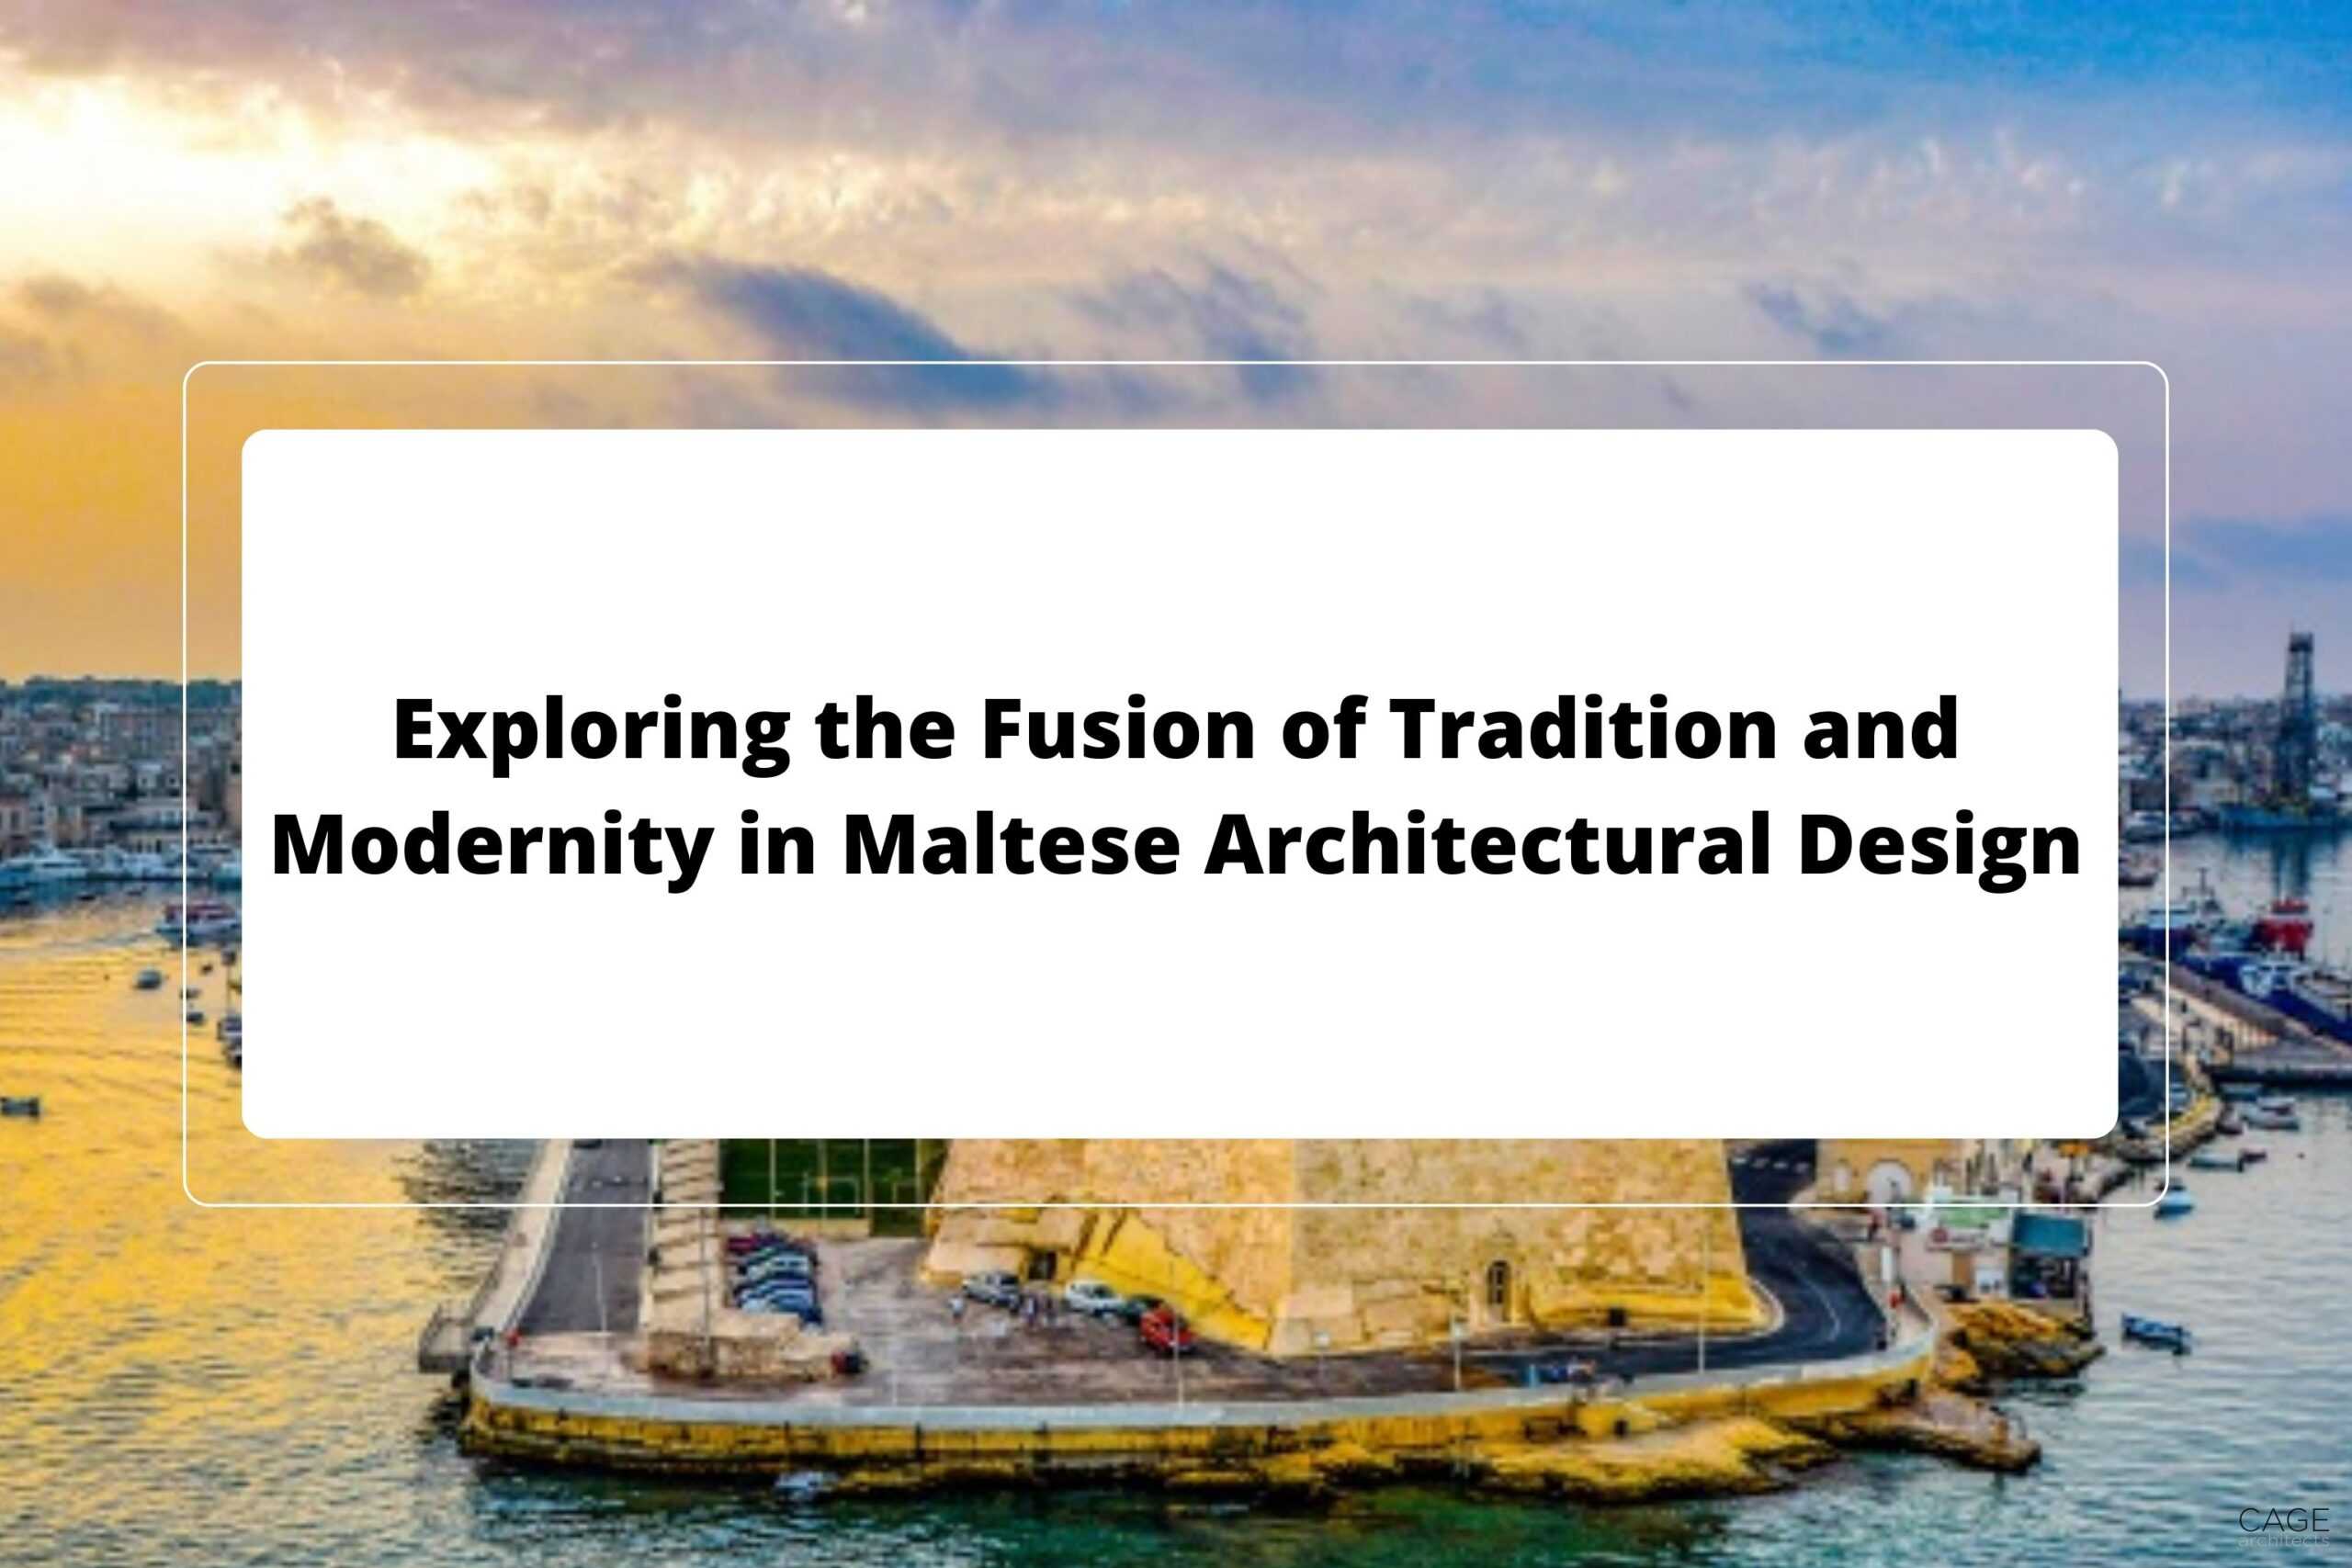 Exploring the Fusion of Tradition and Modernity in Maltese Architectural Design